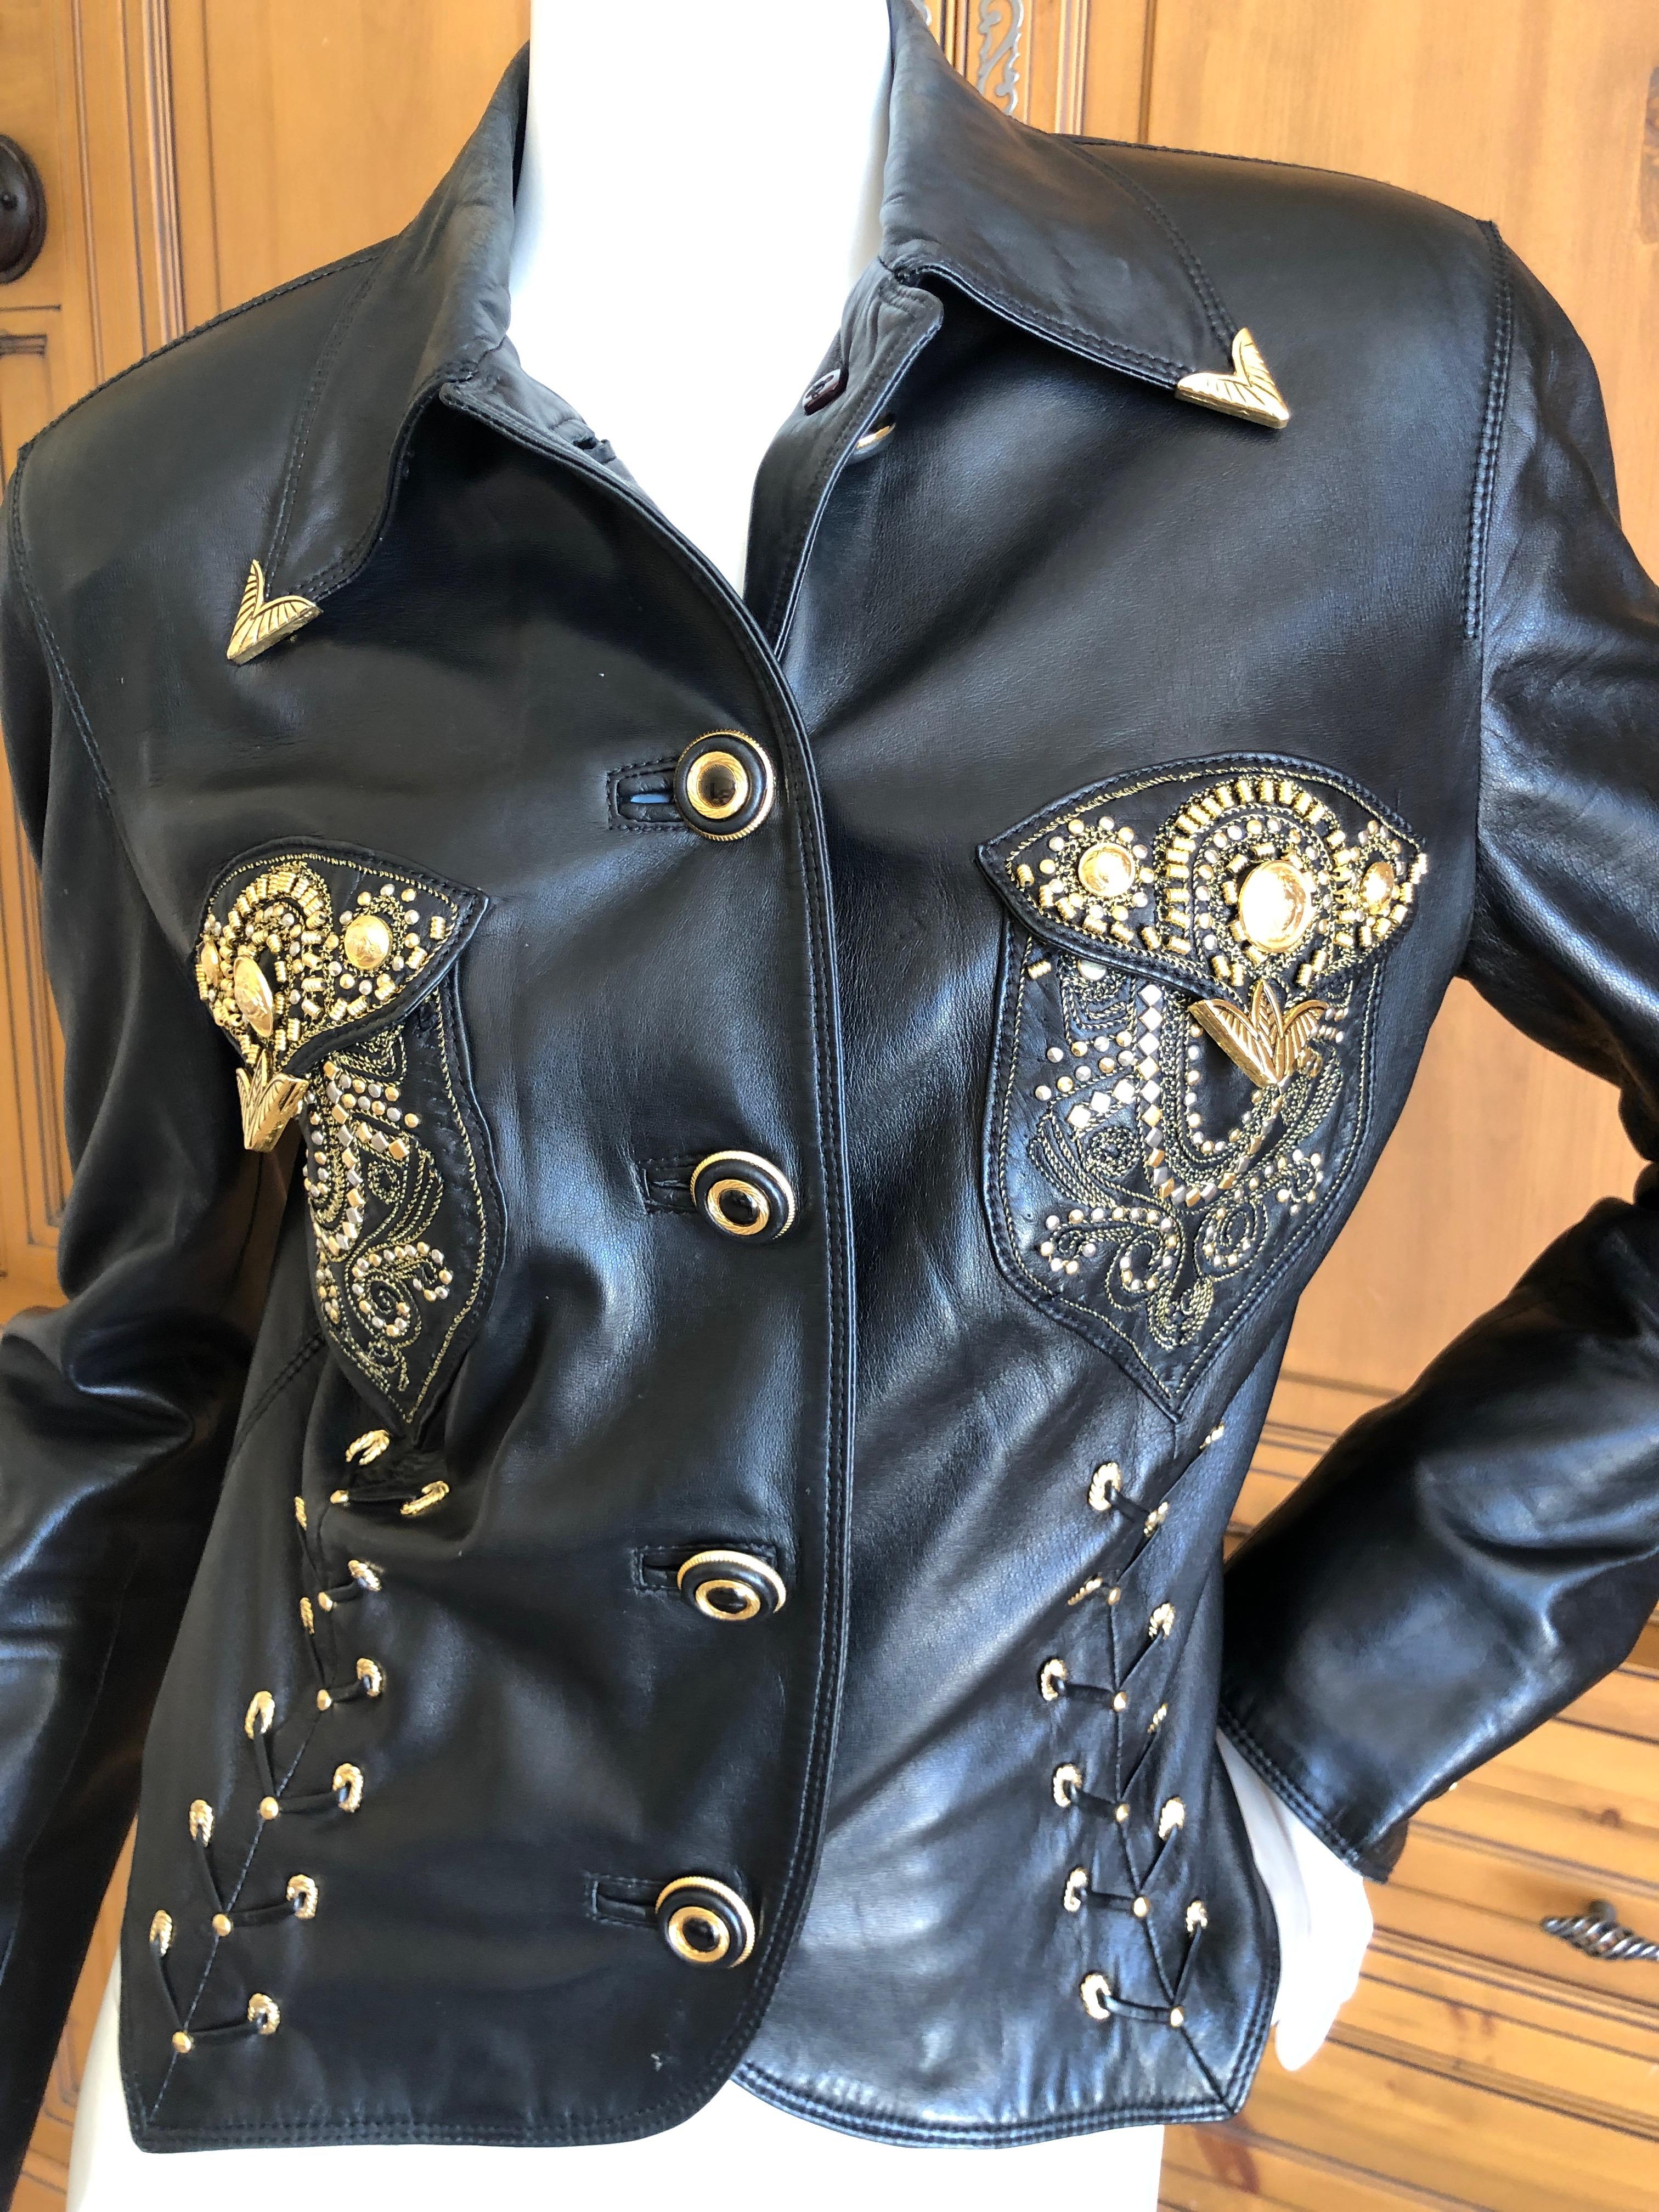 Gianni Versace 1990 Lambskin Leather Moto Jacket with Gold Embellishment For Sale 6